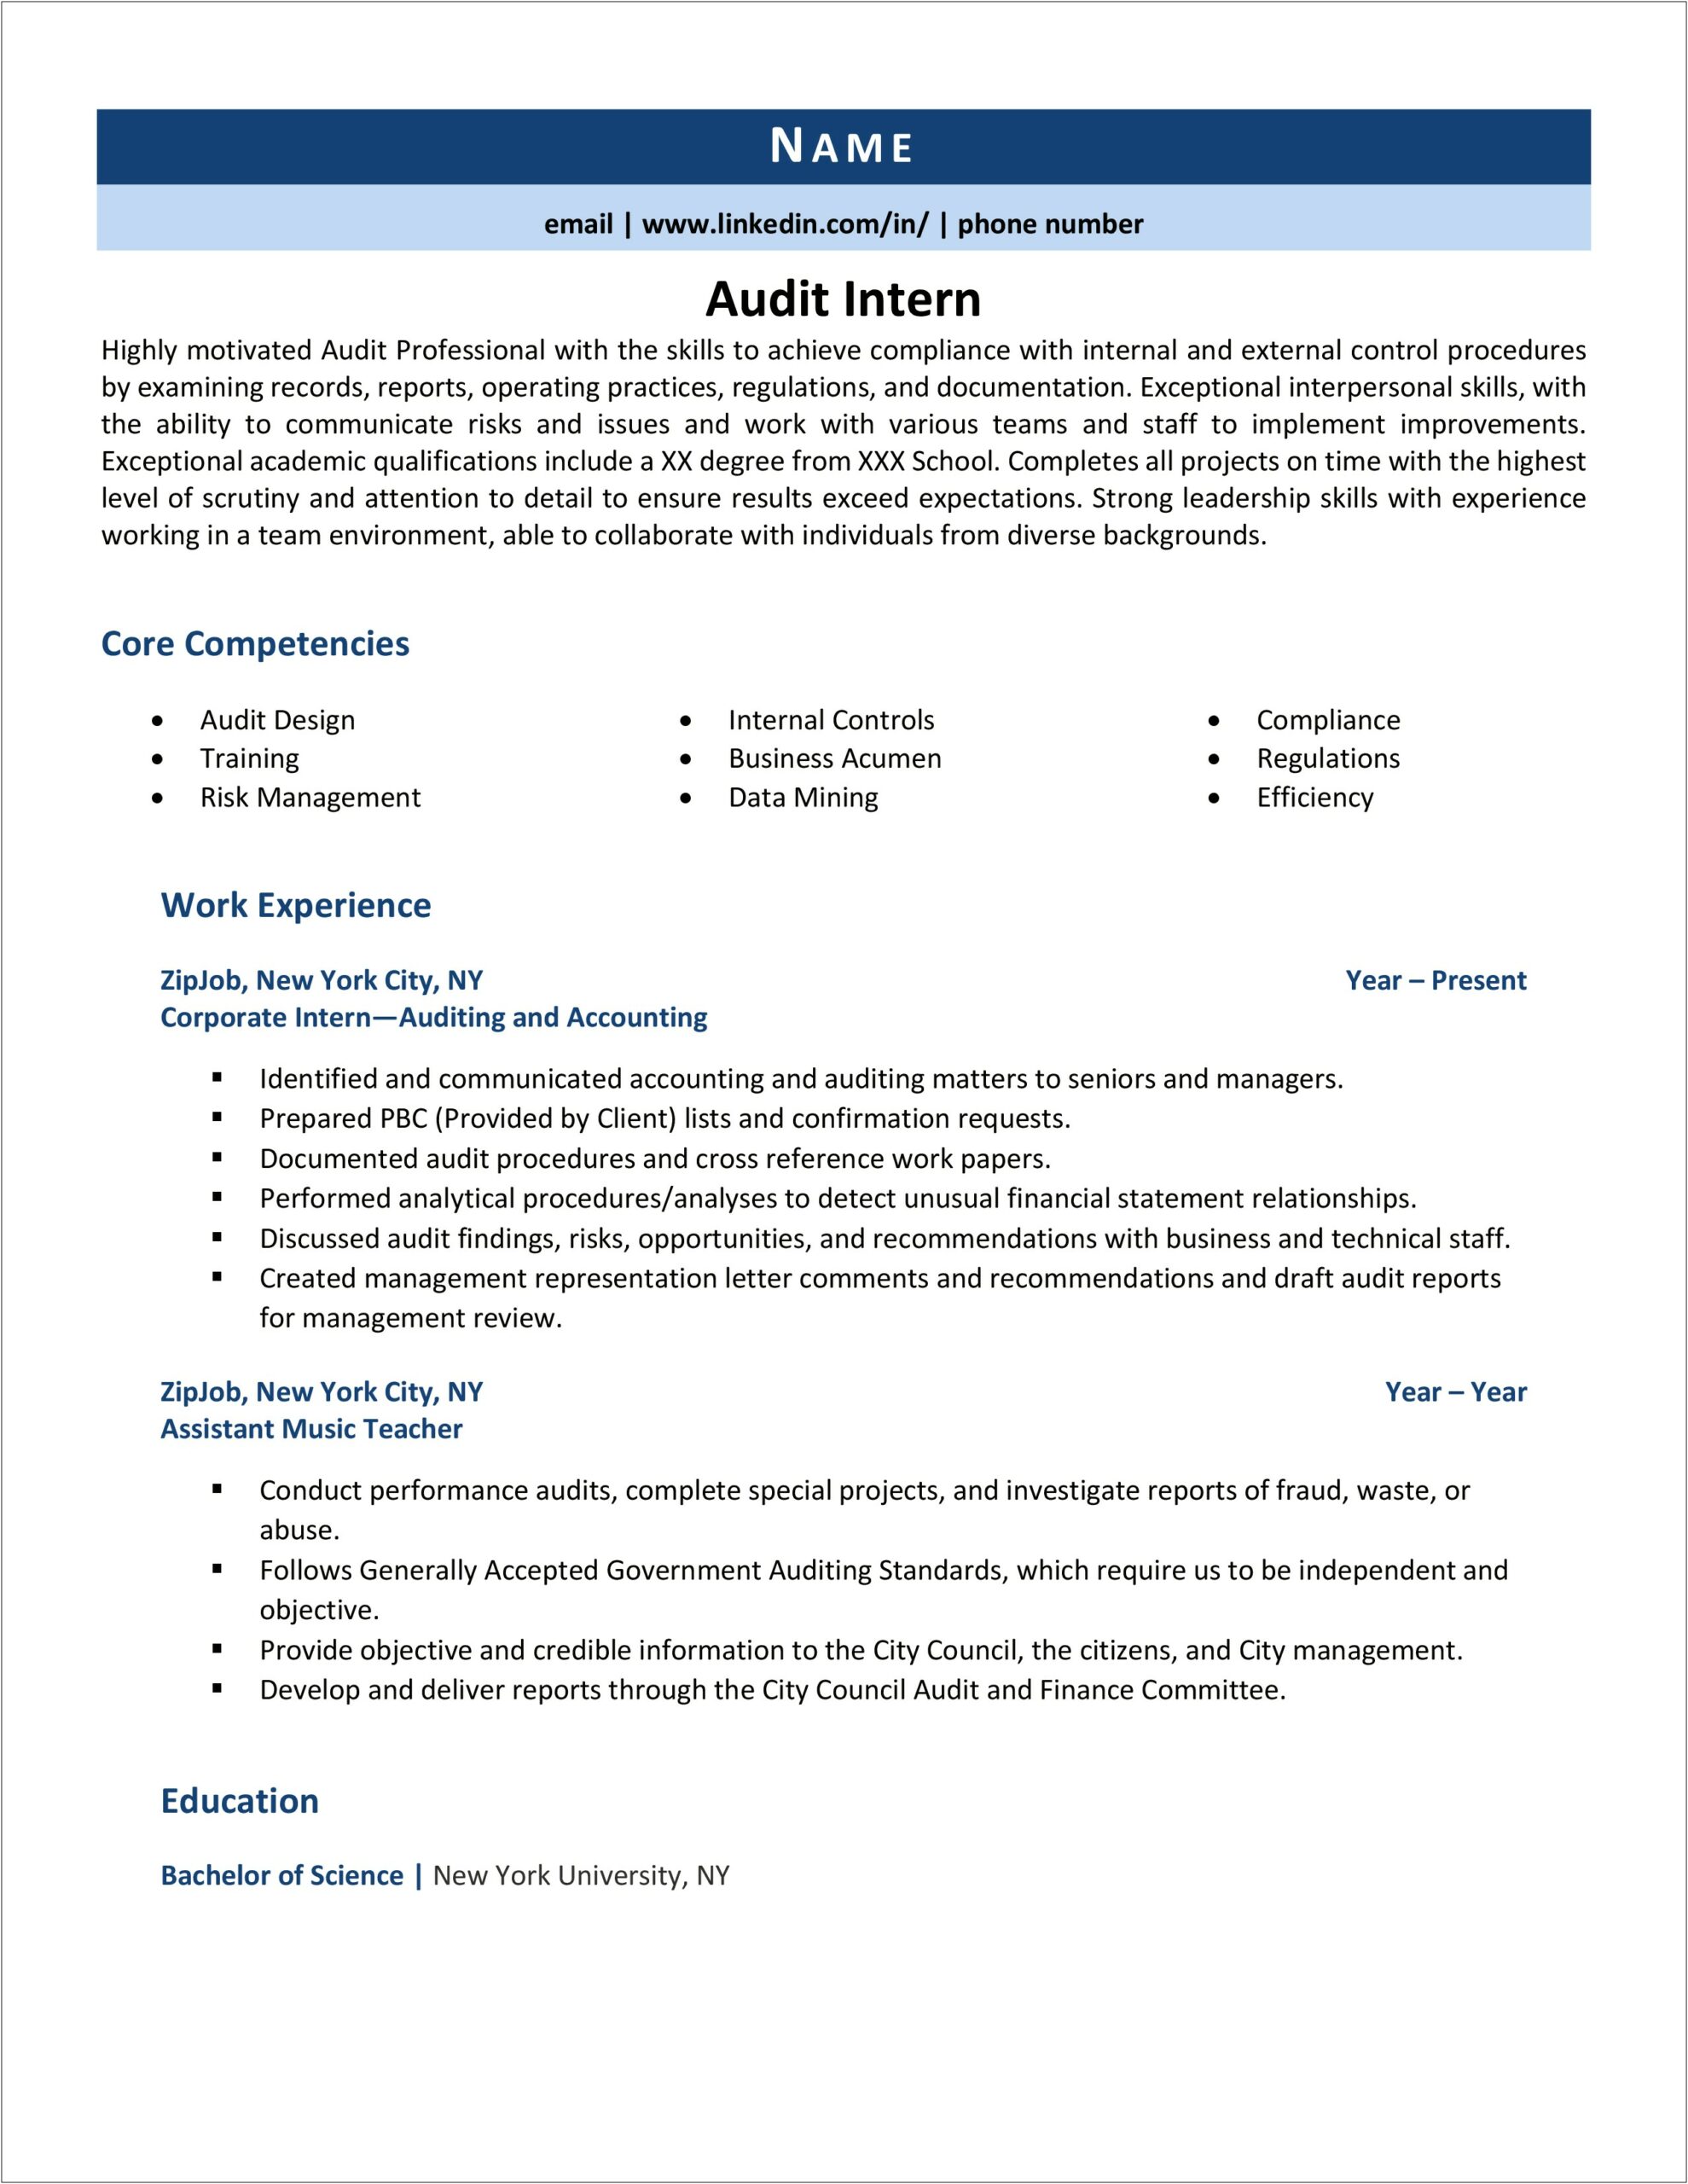 Resume Objective Statement For Accounting Internship